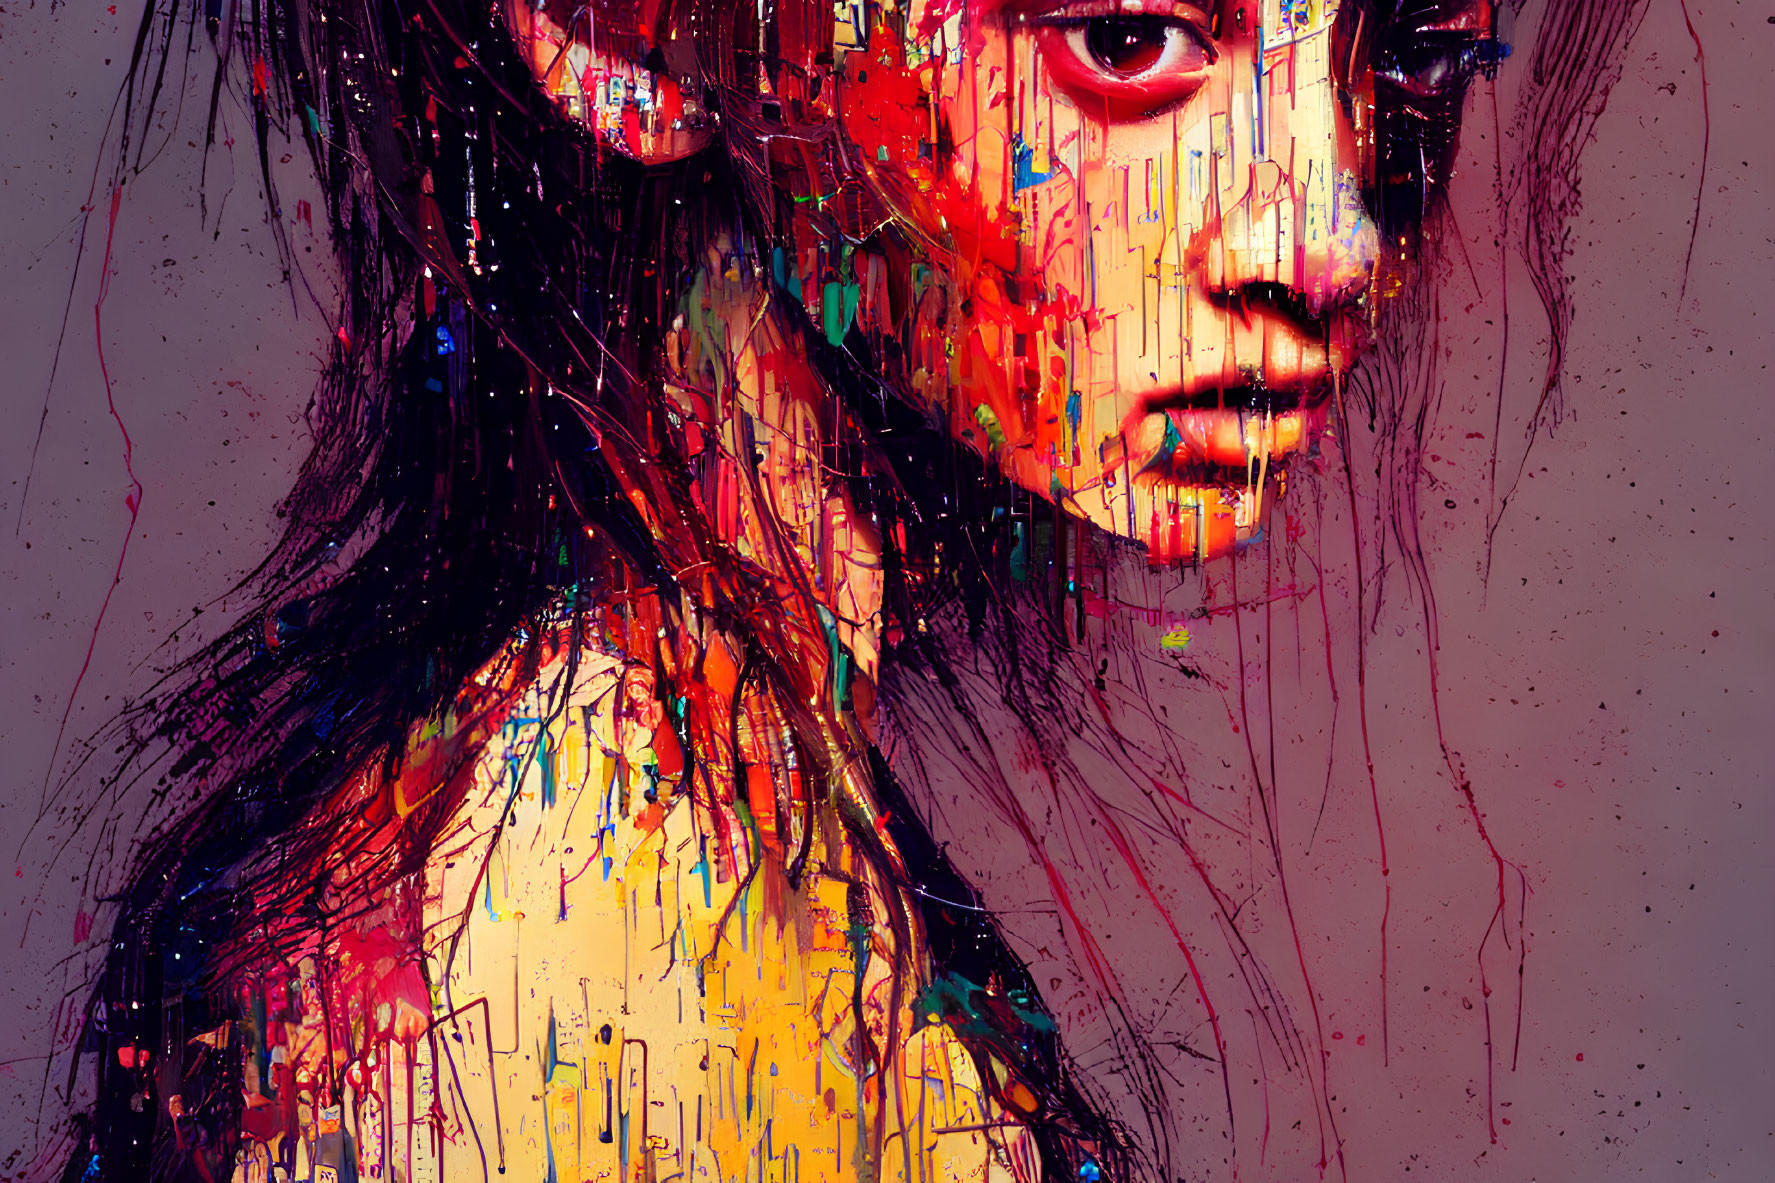 Colorful Abstract Digital Portrait with Paint Streaks on Textured Background